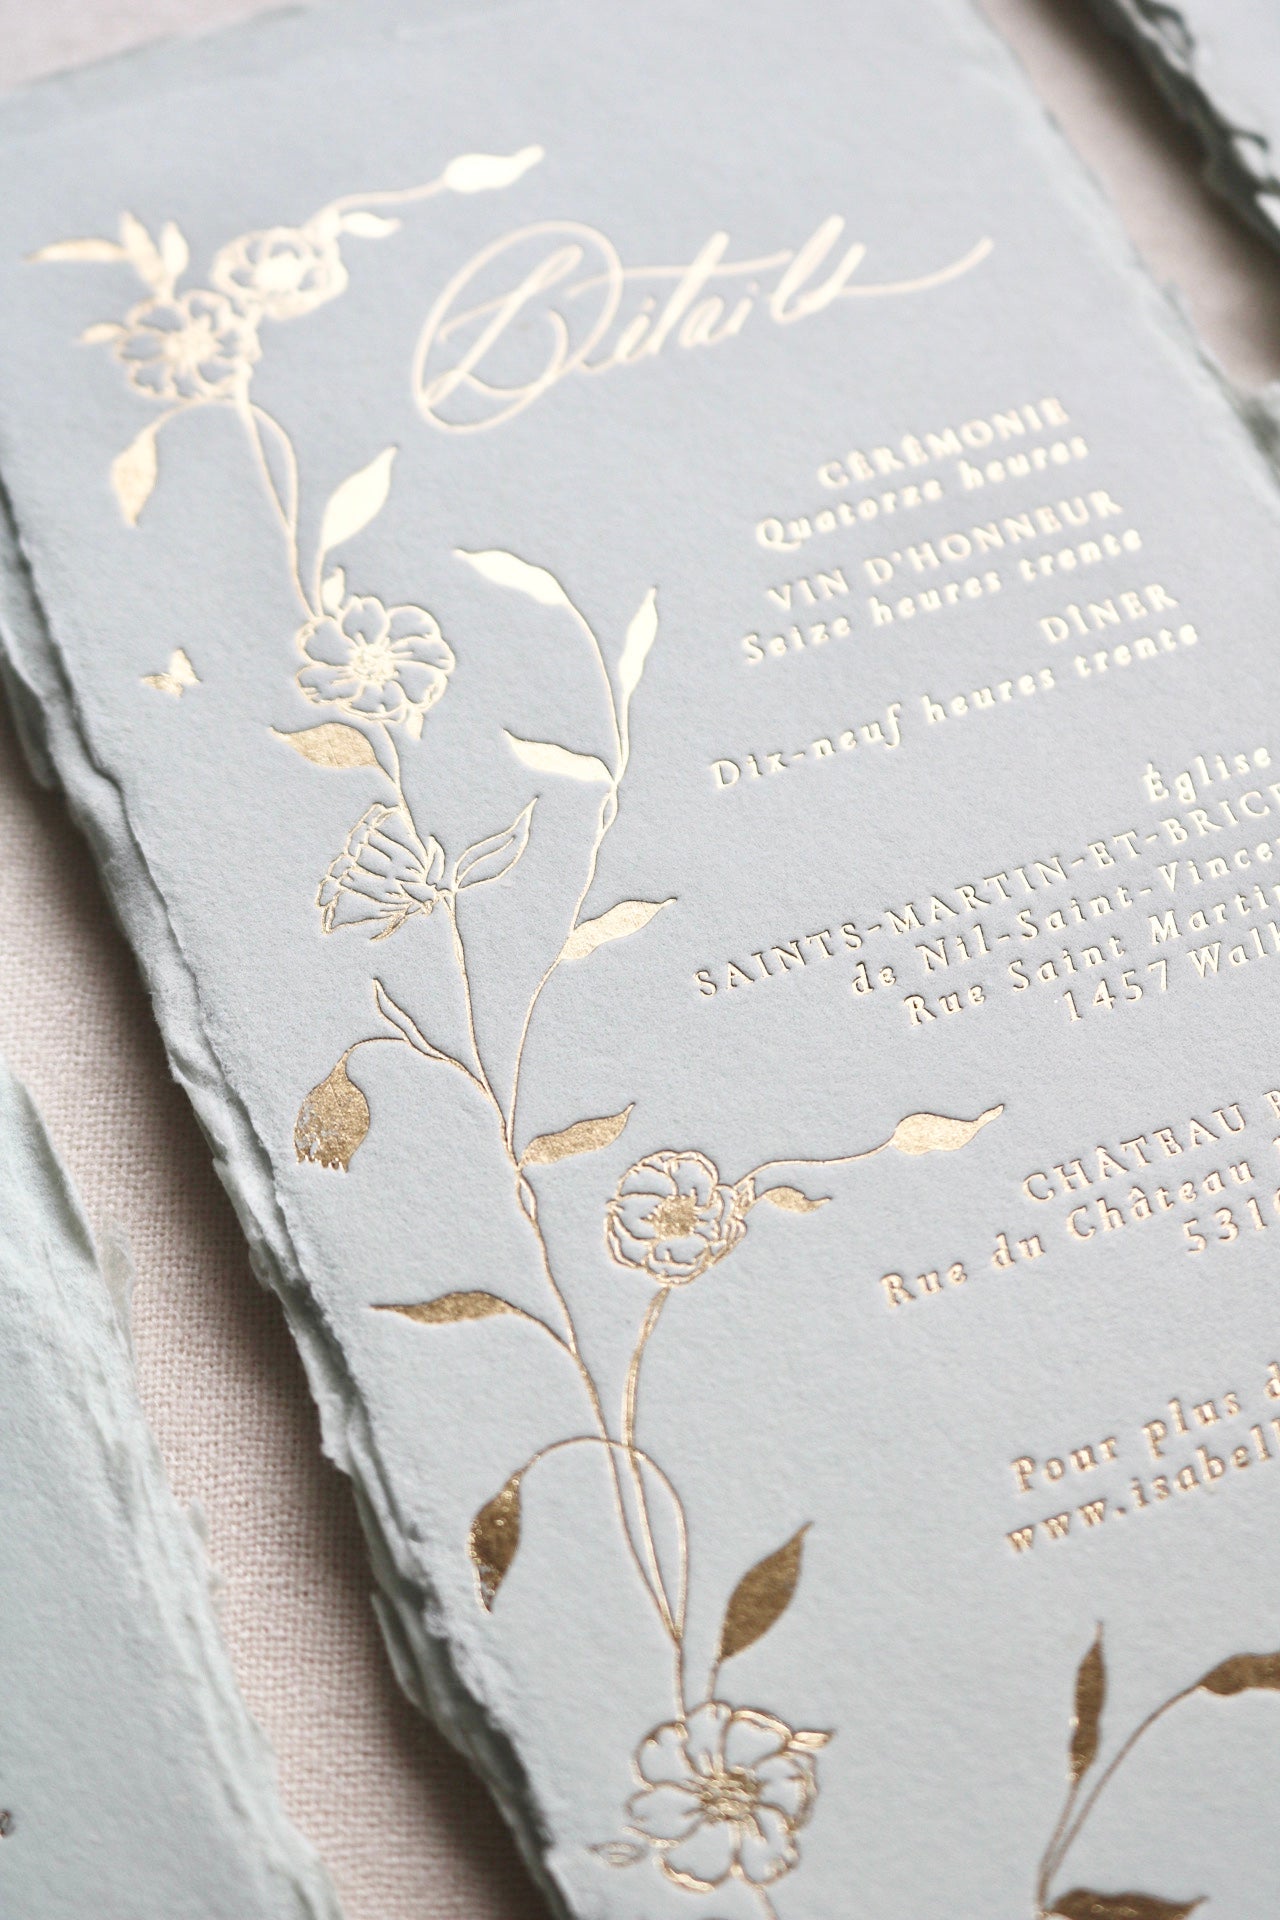 Transform your wedding stationery with hot foil printing on handmade paper. Explore expert advice and captivating designs now!